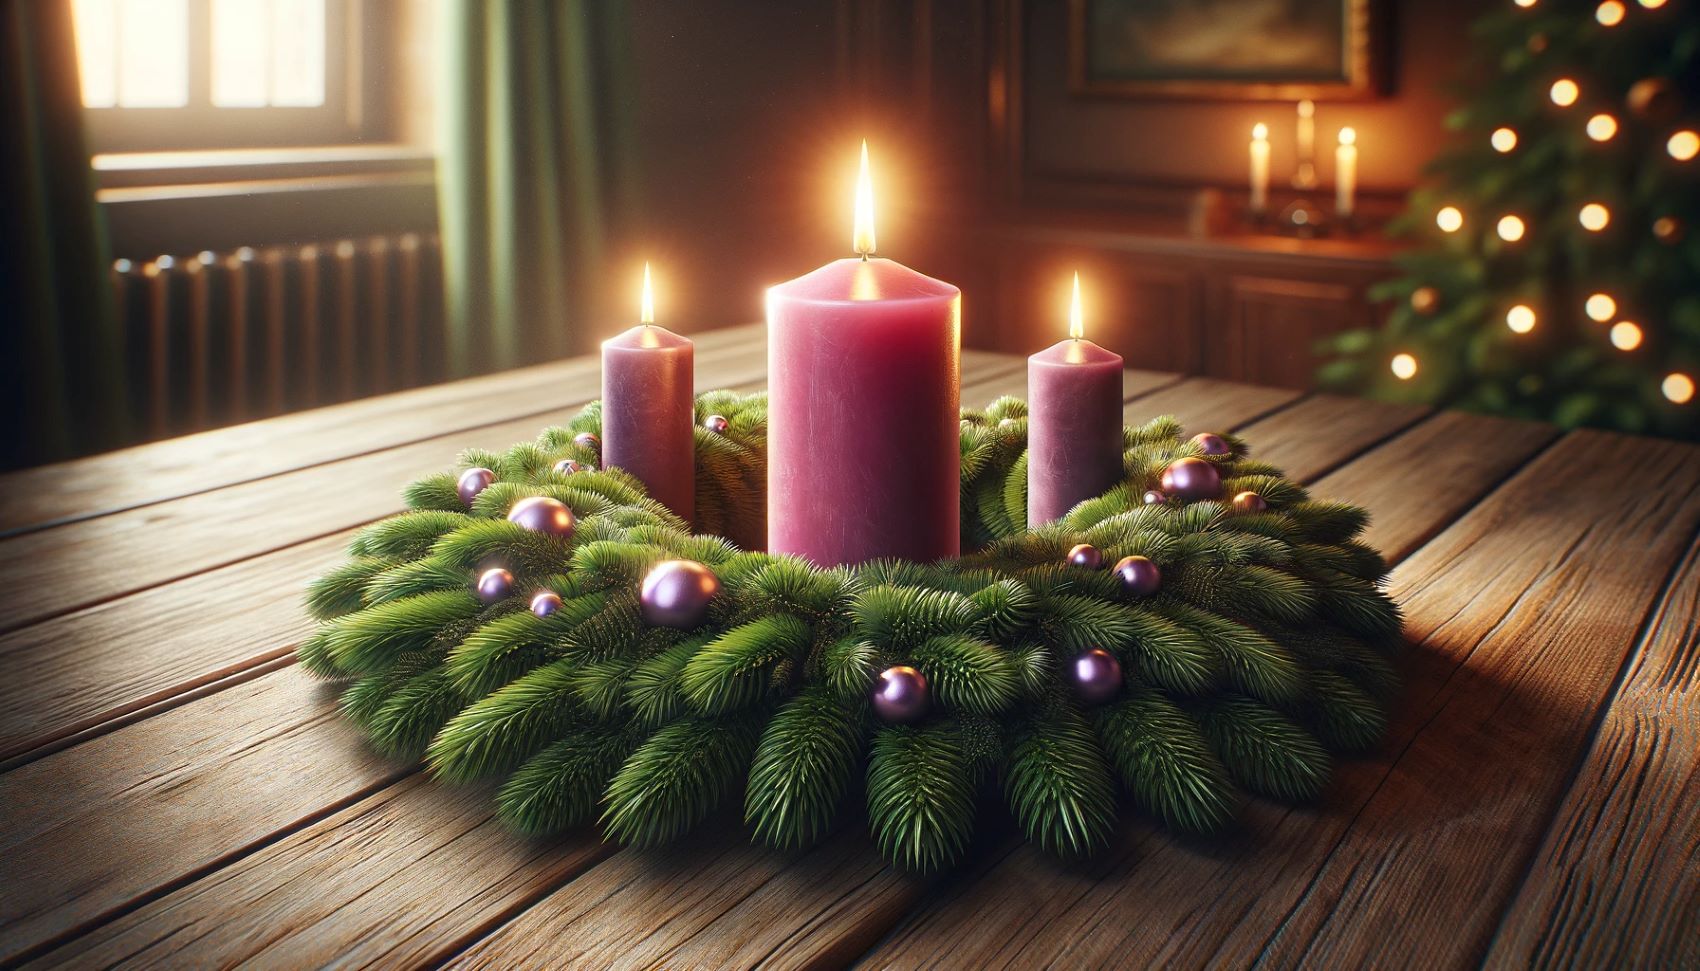 Why Is The Third Candle Pink On Advent Wreath